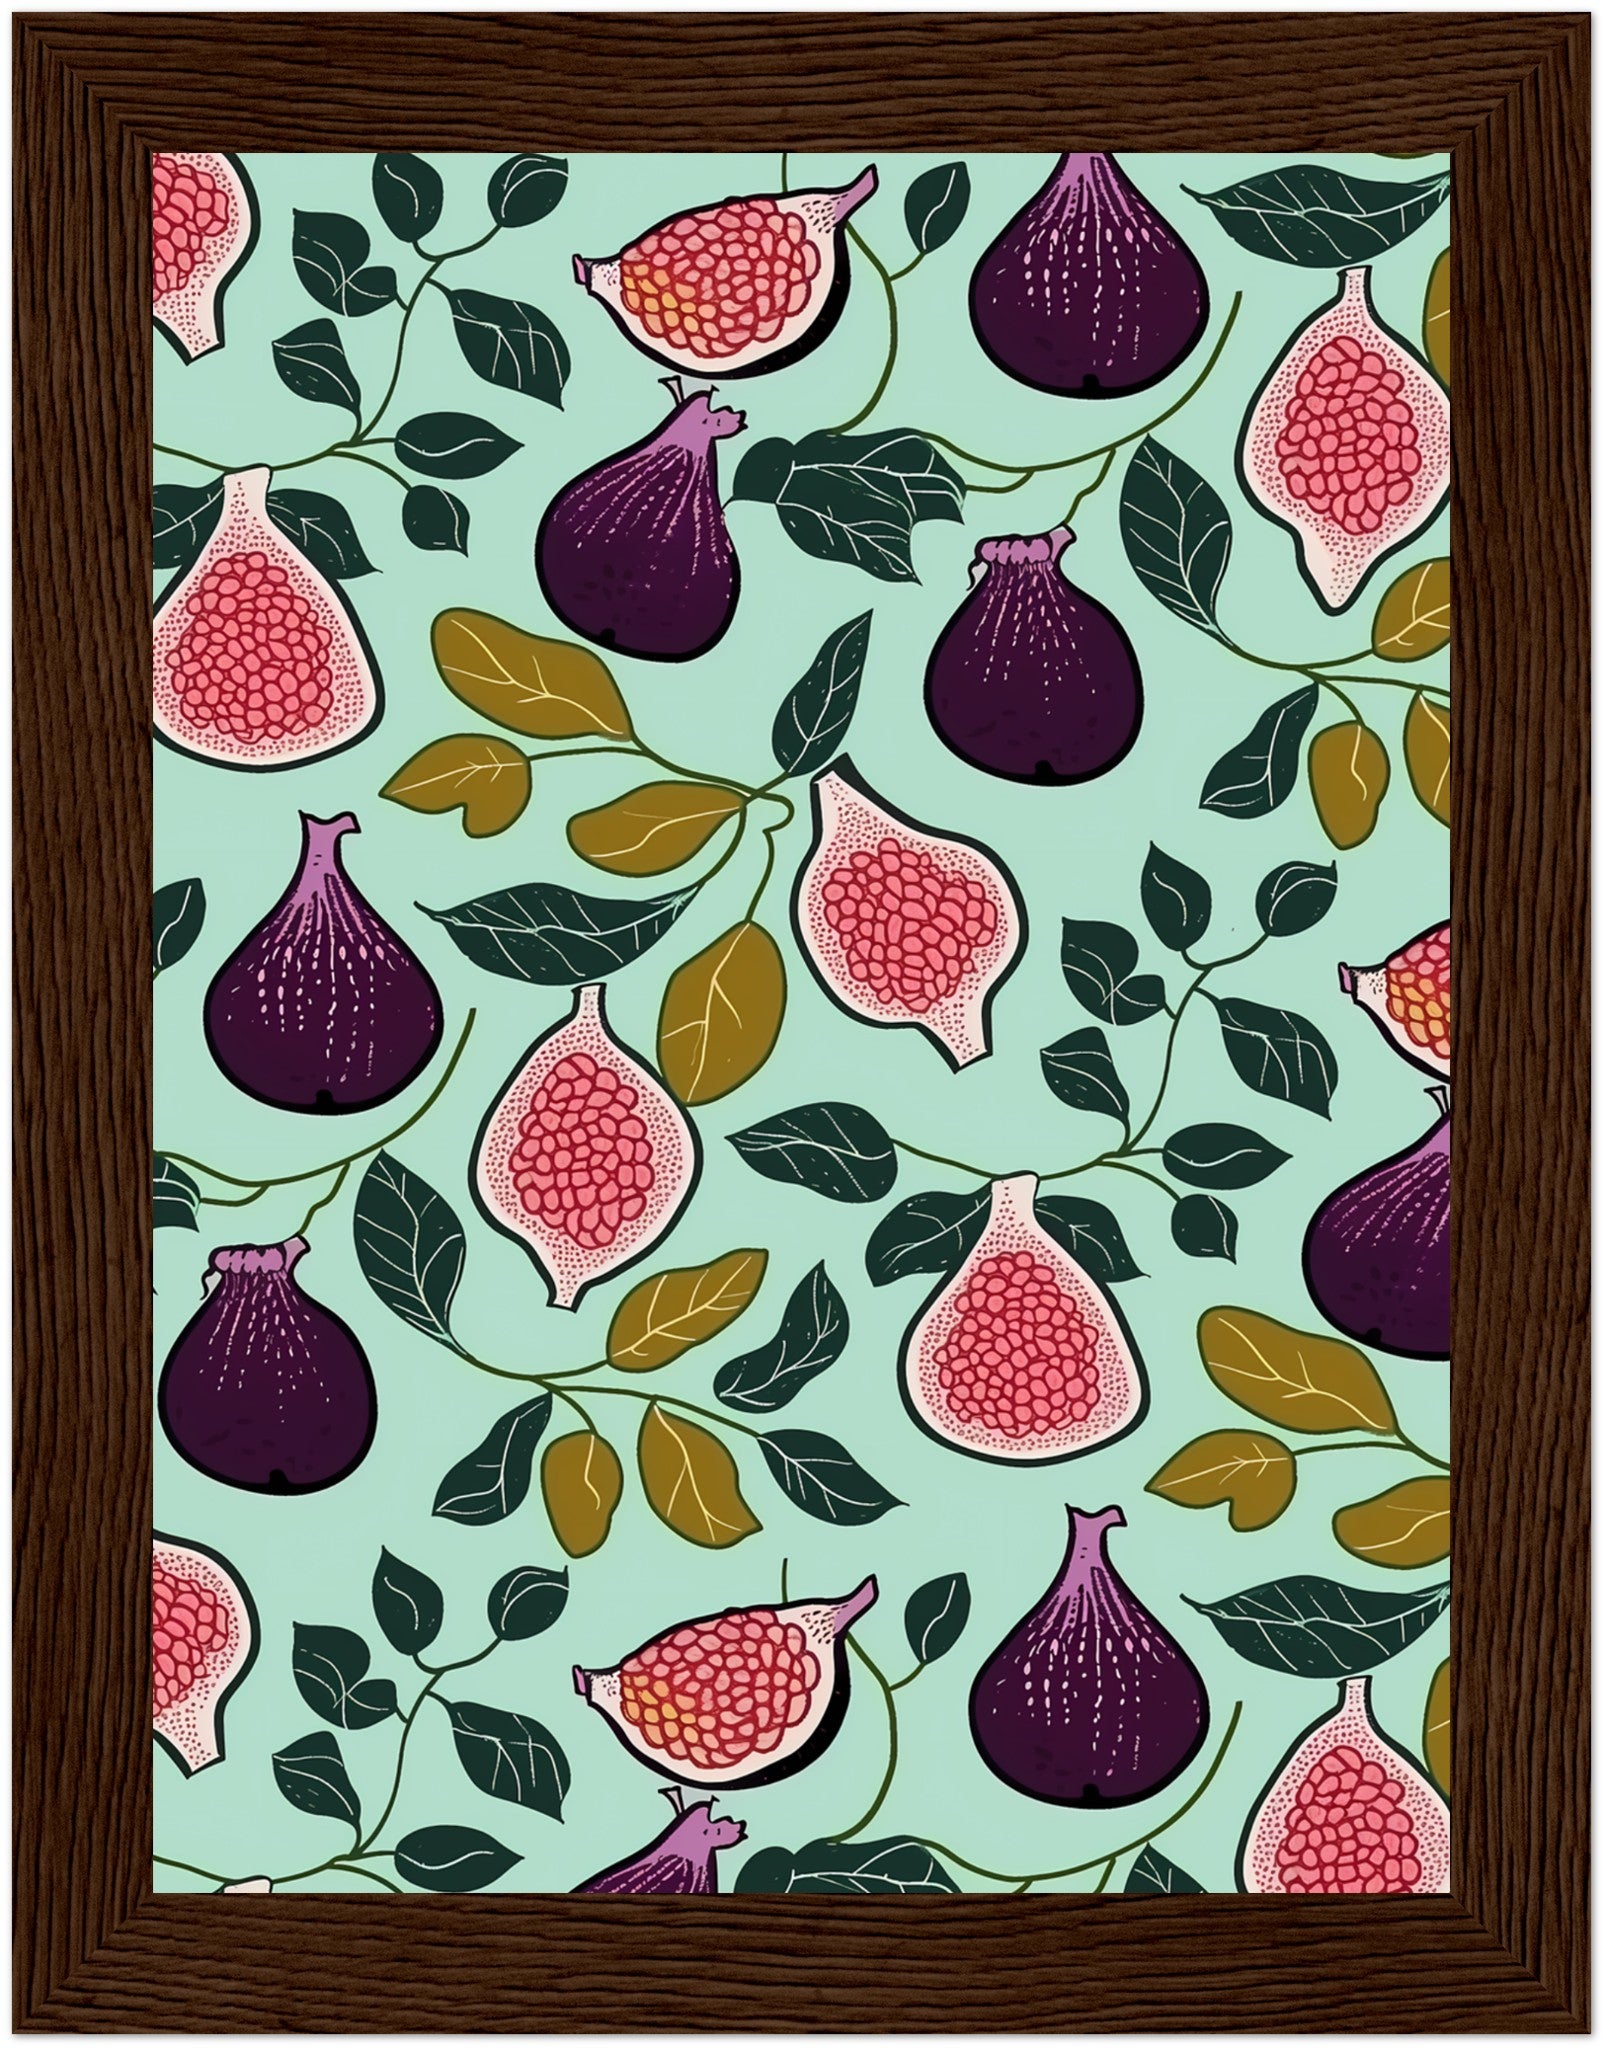 A colorful illustration of figs and pomegranates with leaves on a teal background, framed by a brown border.